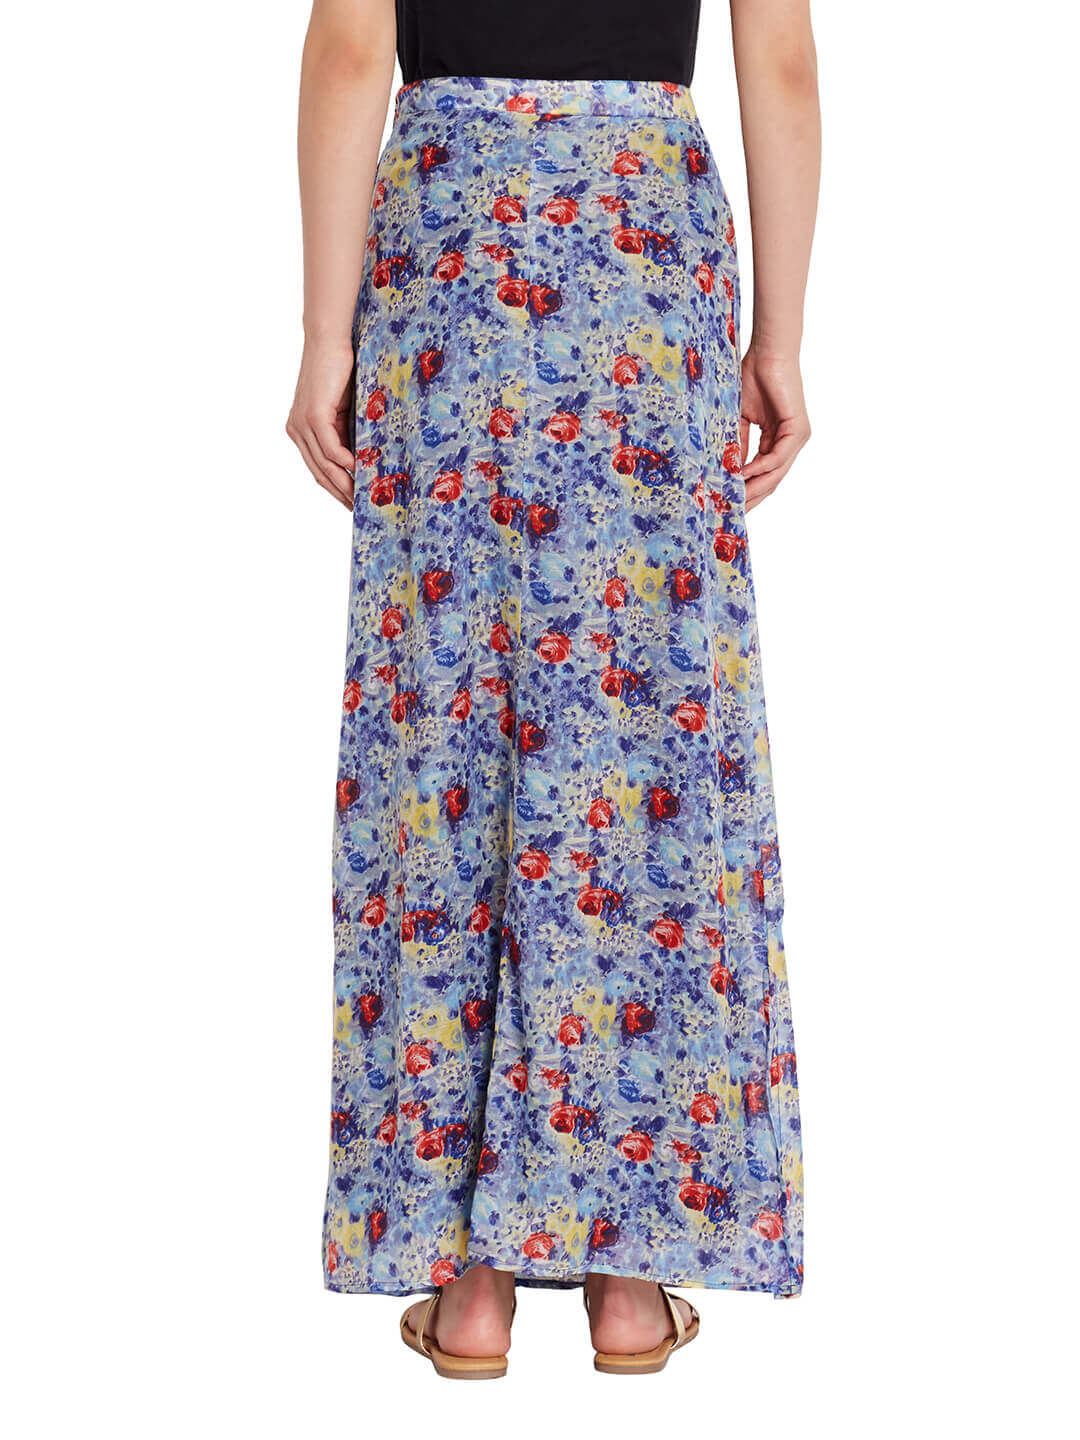 Maxi Skirt In Indigo Print With Side Pocket Detail